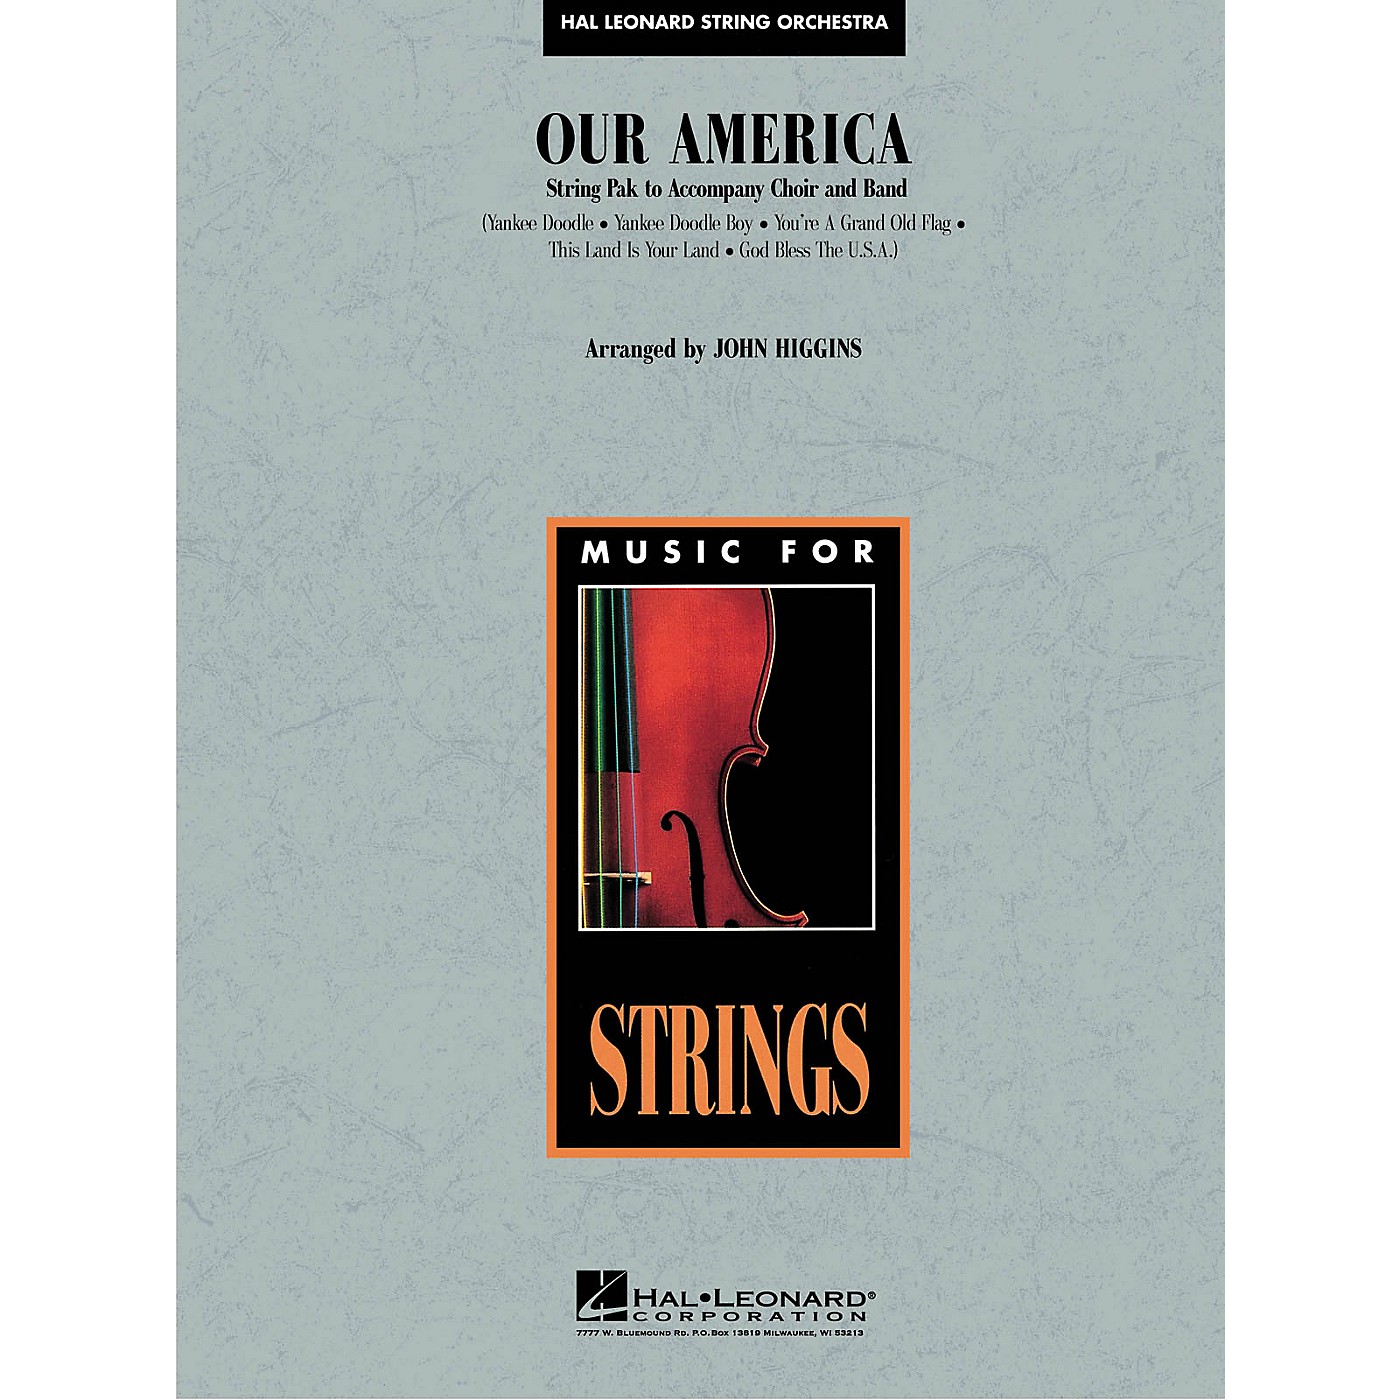 Hal Leonard Our America (String Pak to Accompany Band and Choir) Concert Band Level 3-4 Arranged by John Higgins thumbnail